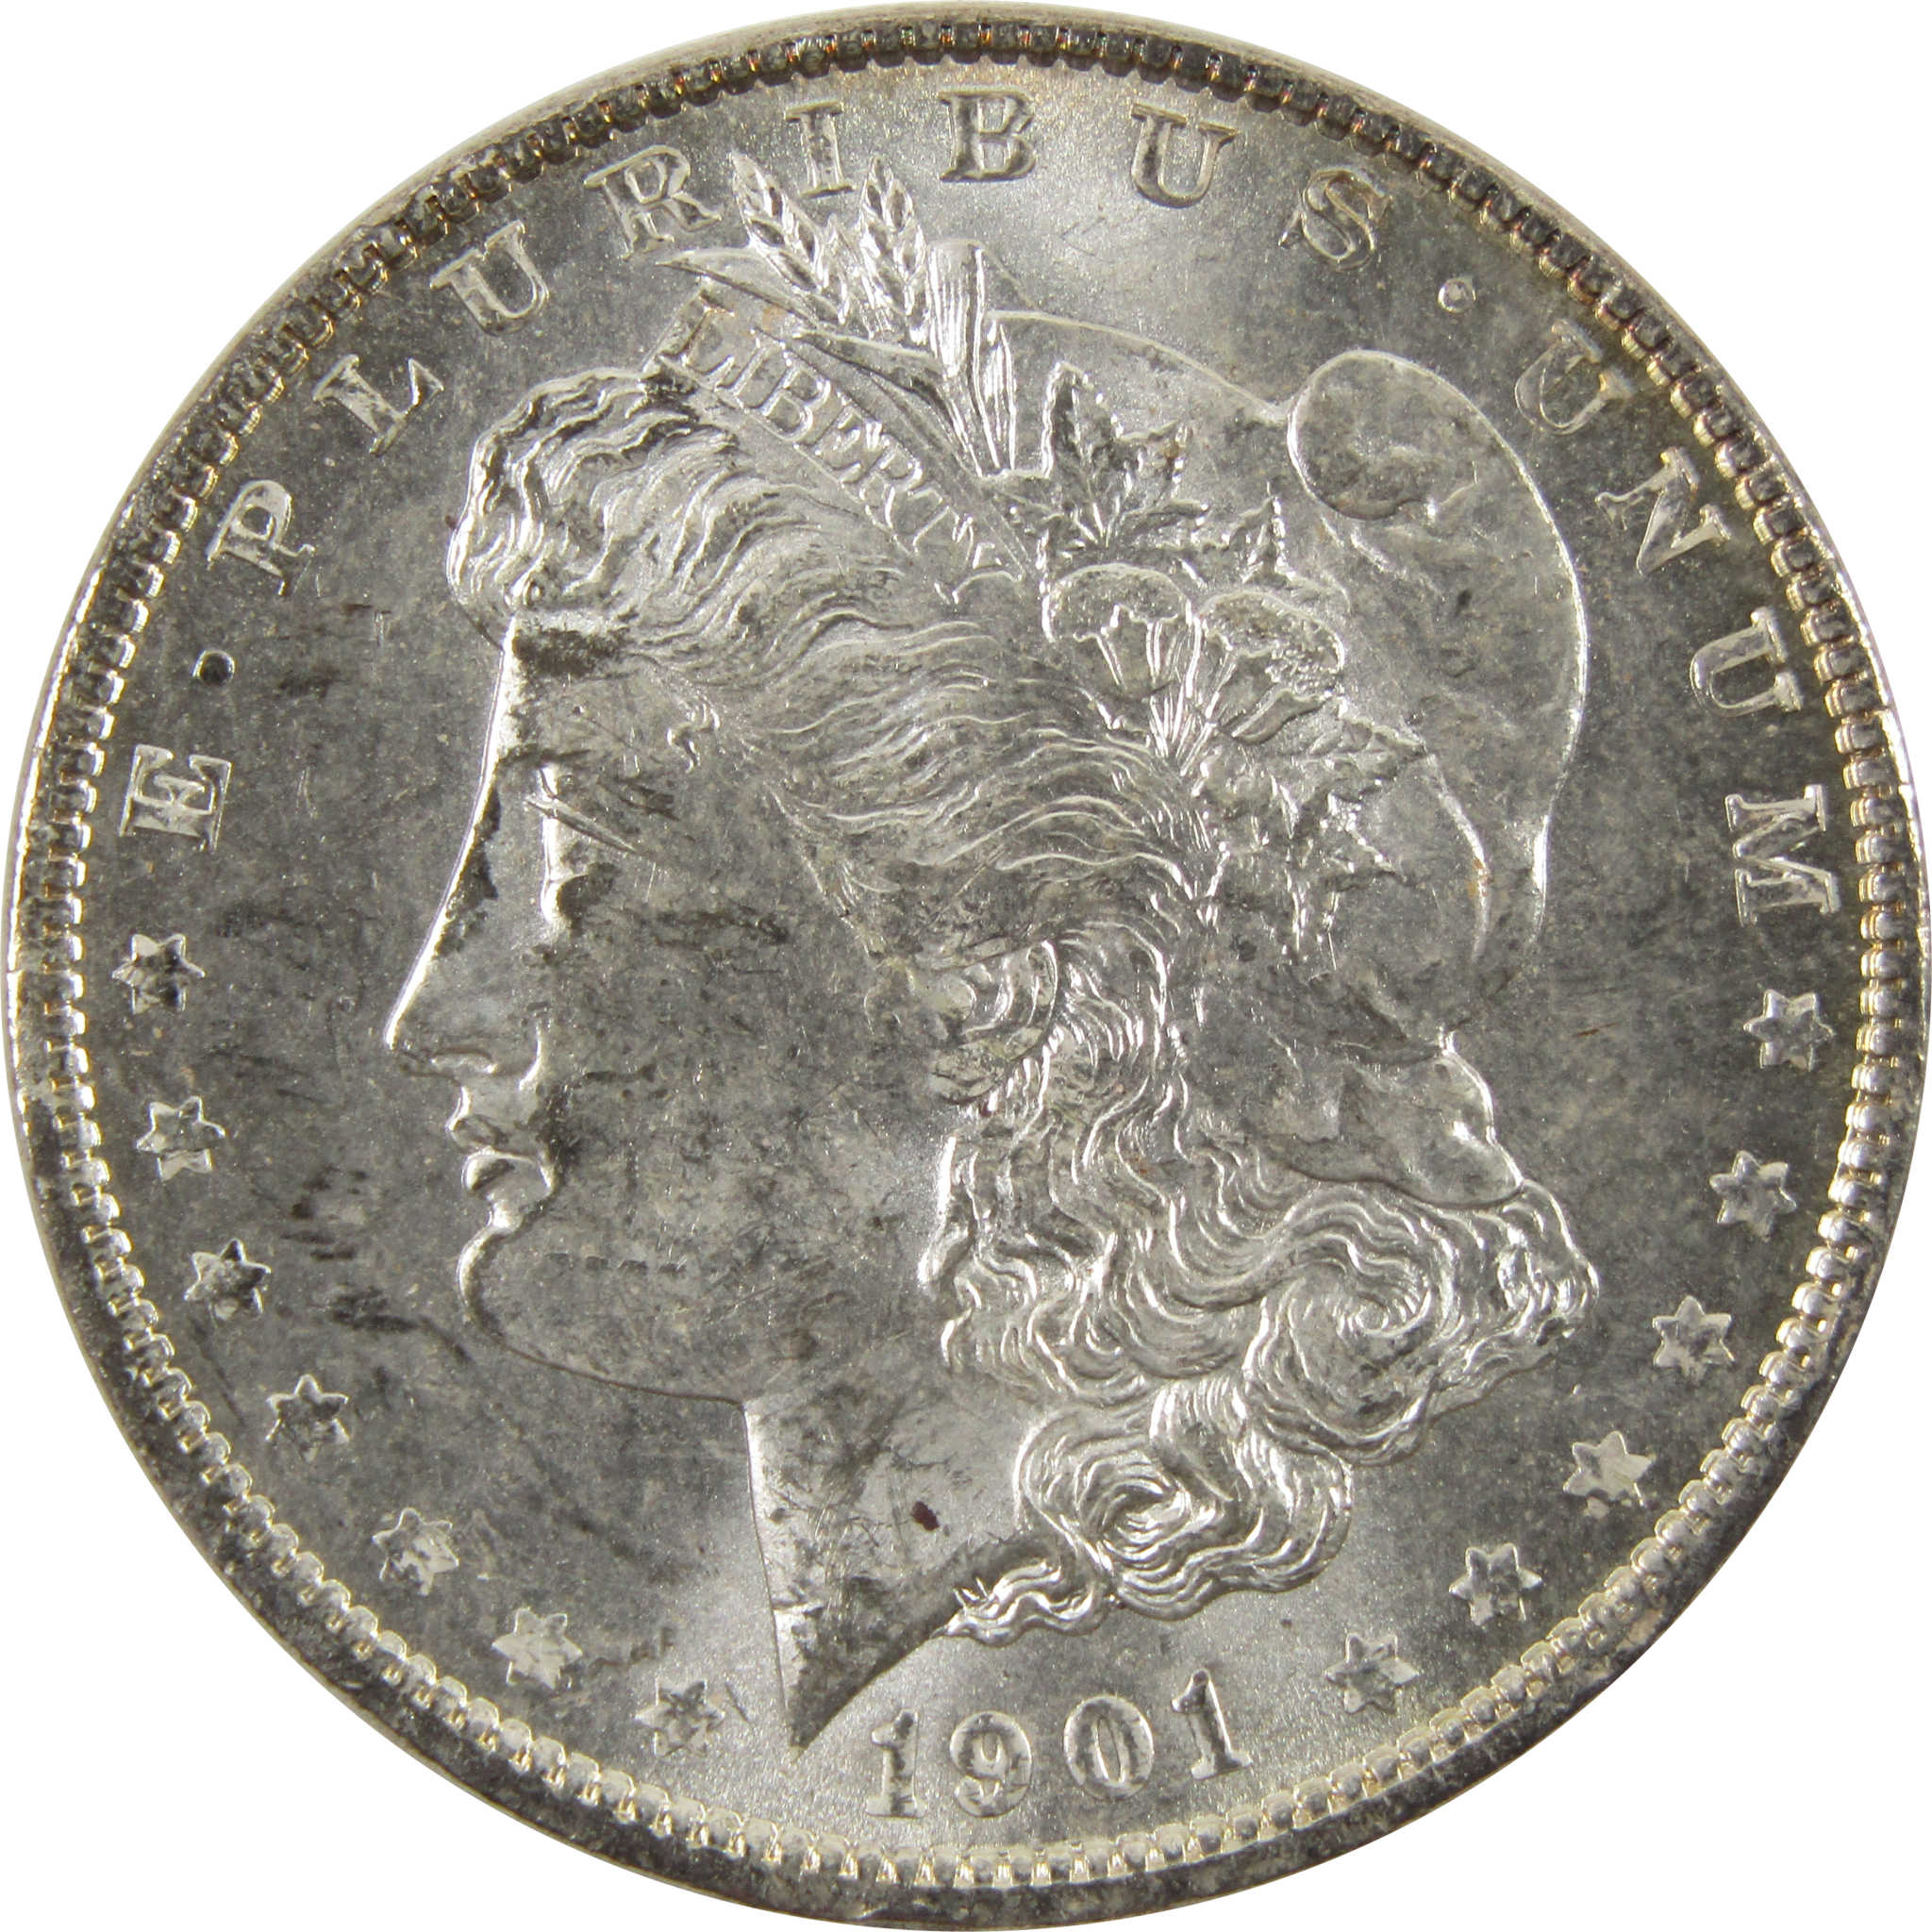 1901 O Morgan Dollar Uncirculated Details 90% Silver $1 SKU:I10464 - Morgan coin - Morgan silver dollar - Morgan silver dollar for sale - Profile Coins &amp; Collectibles